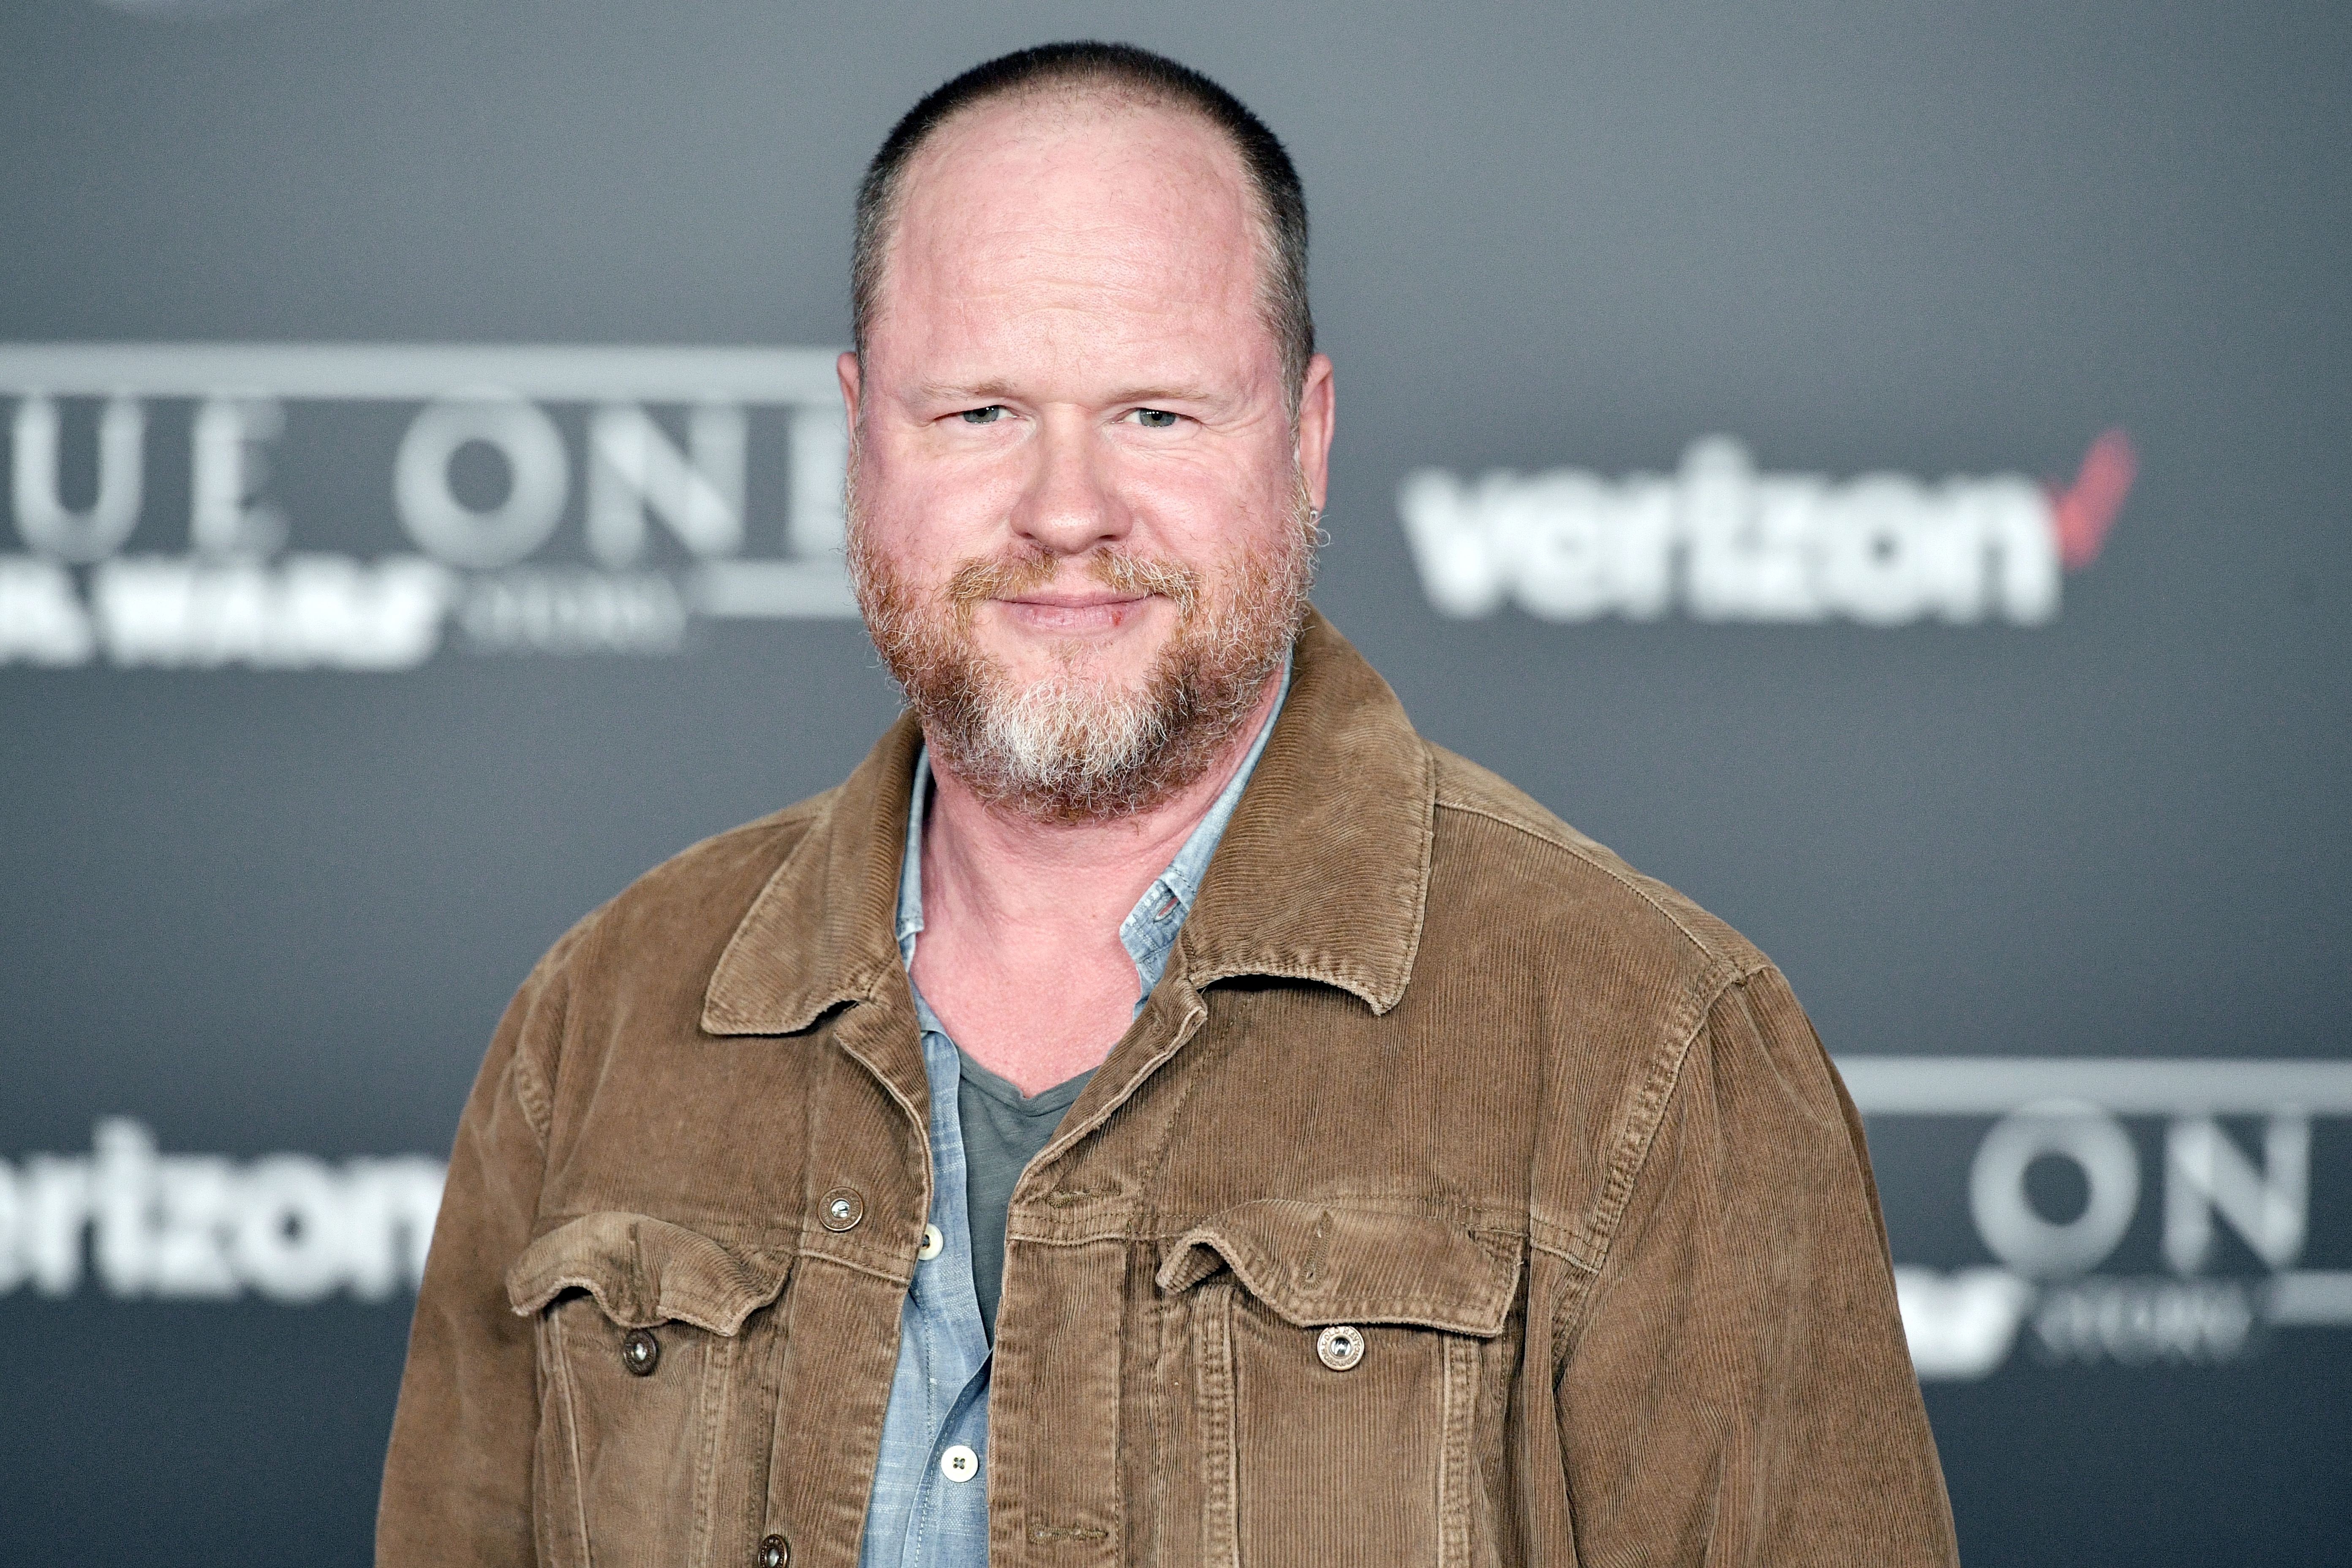 Joss Whedon says he’s “one of the nicer showrunners” while addressing misconduct allegations